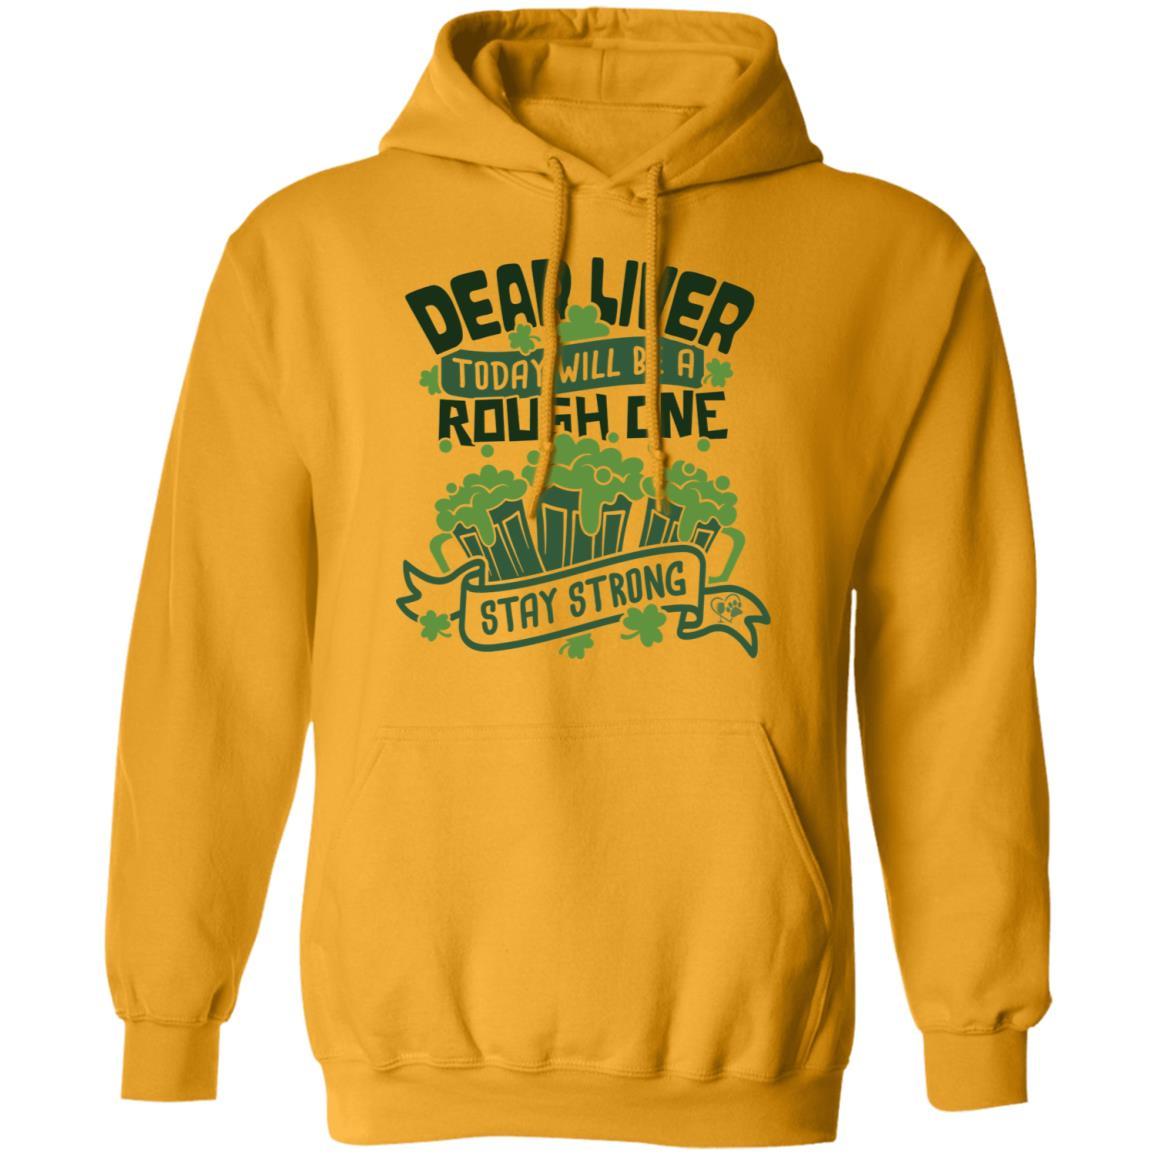 Sweatshirts Gold / S Winey Bitches Co "Dear Liver, Today will be a Rough One" Pullover Hoodie 8 oz. WineyBitchesCo